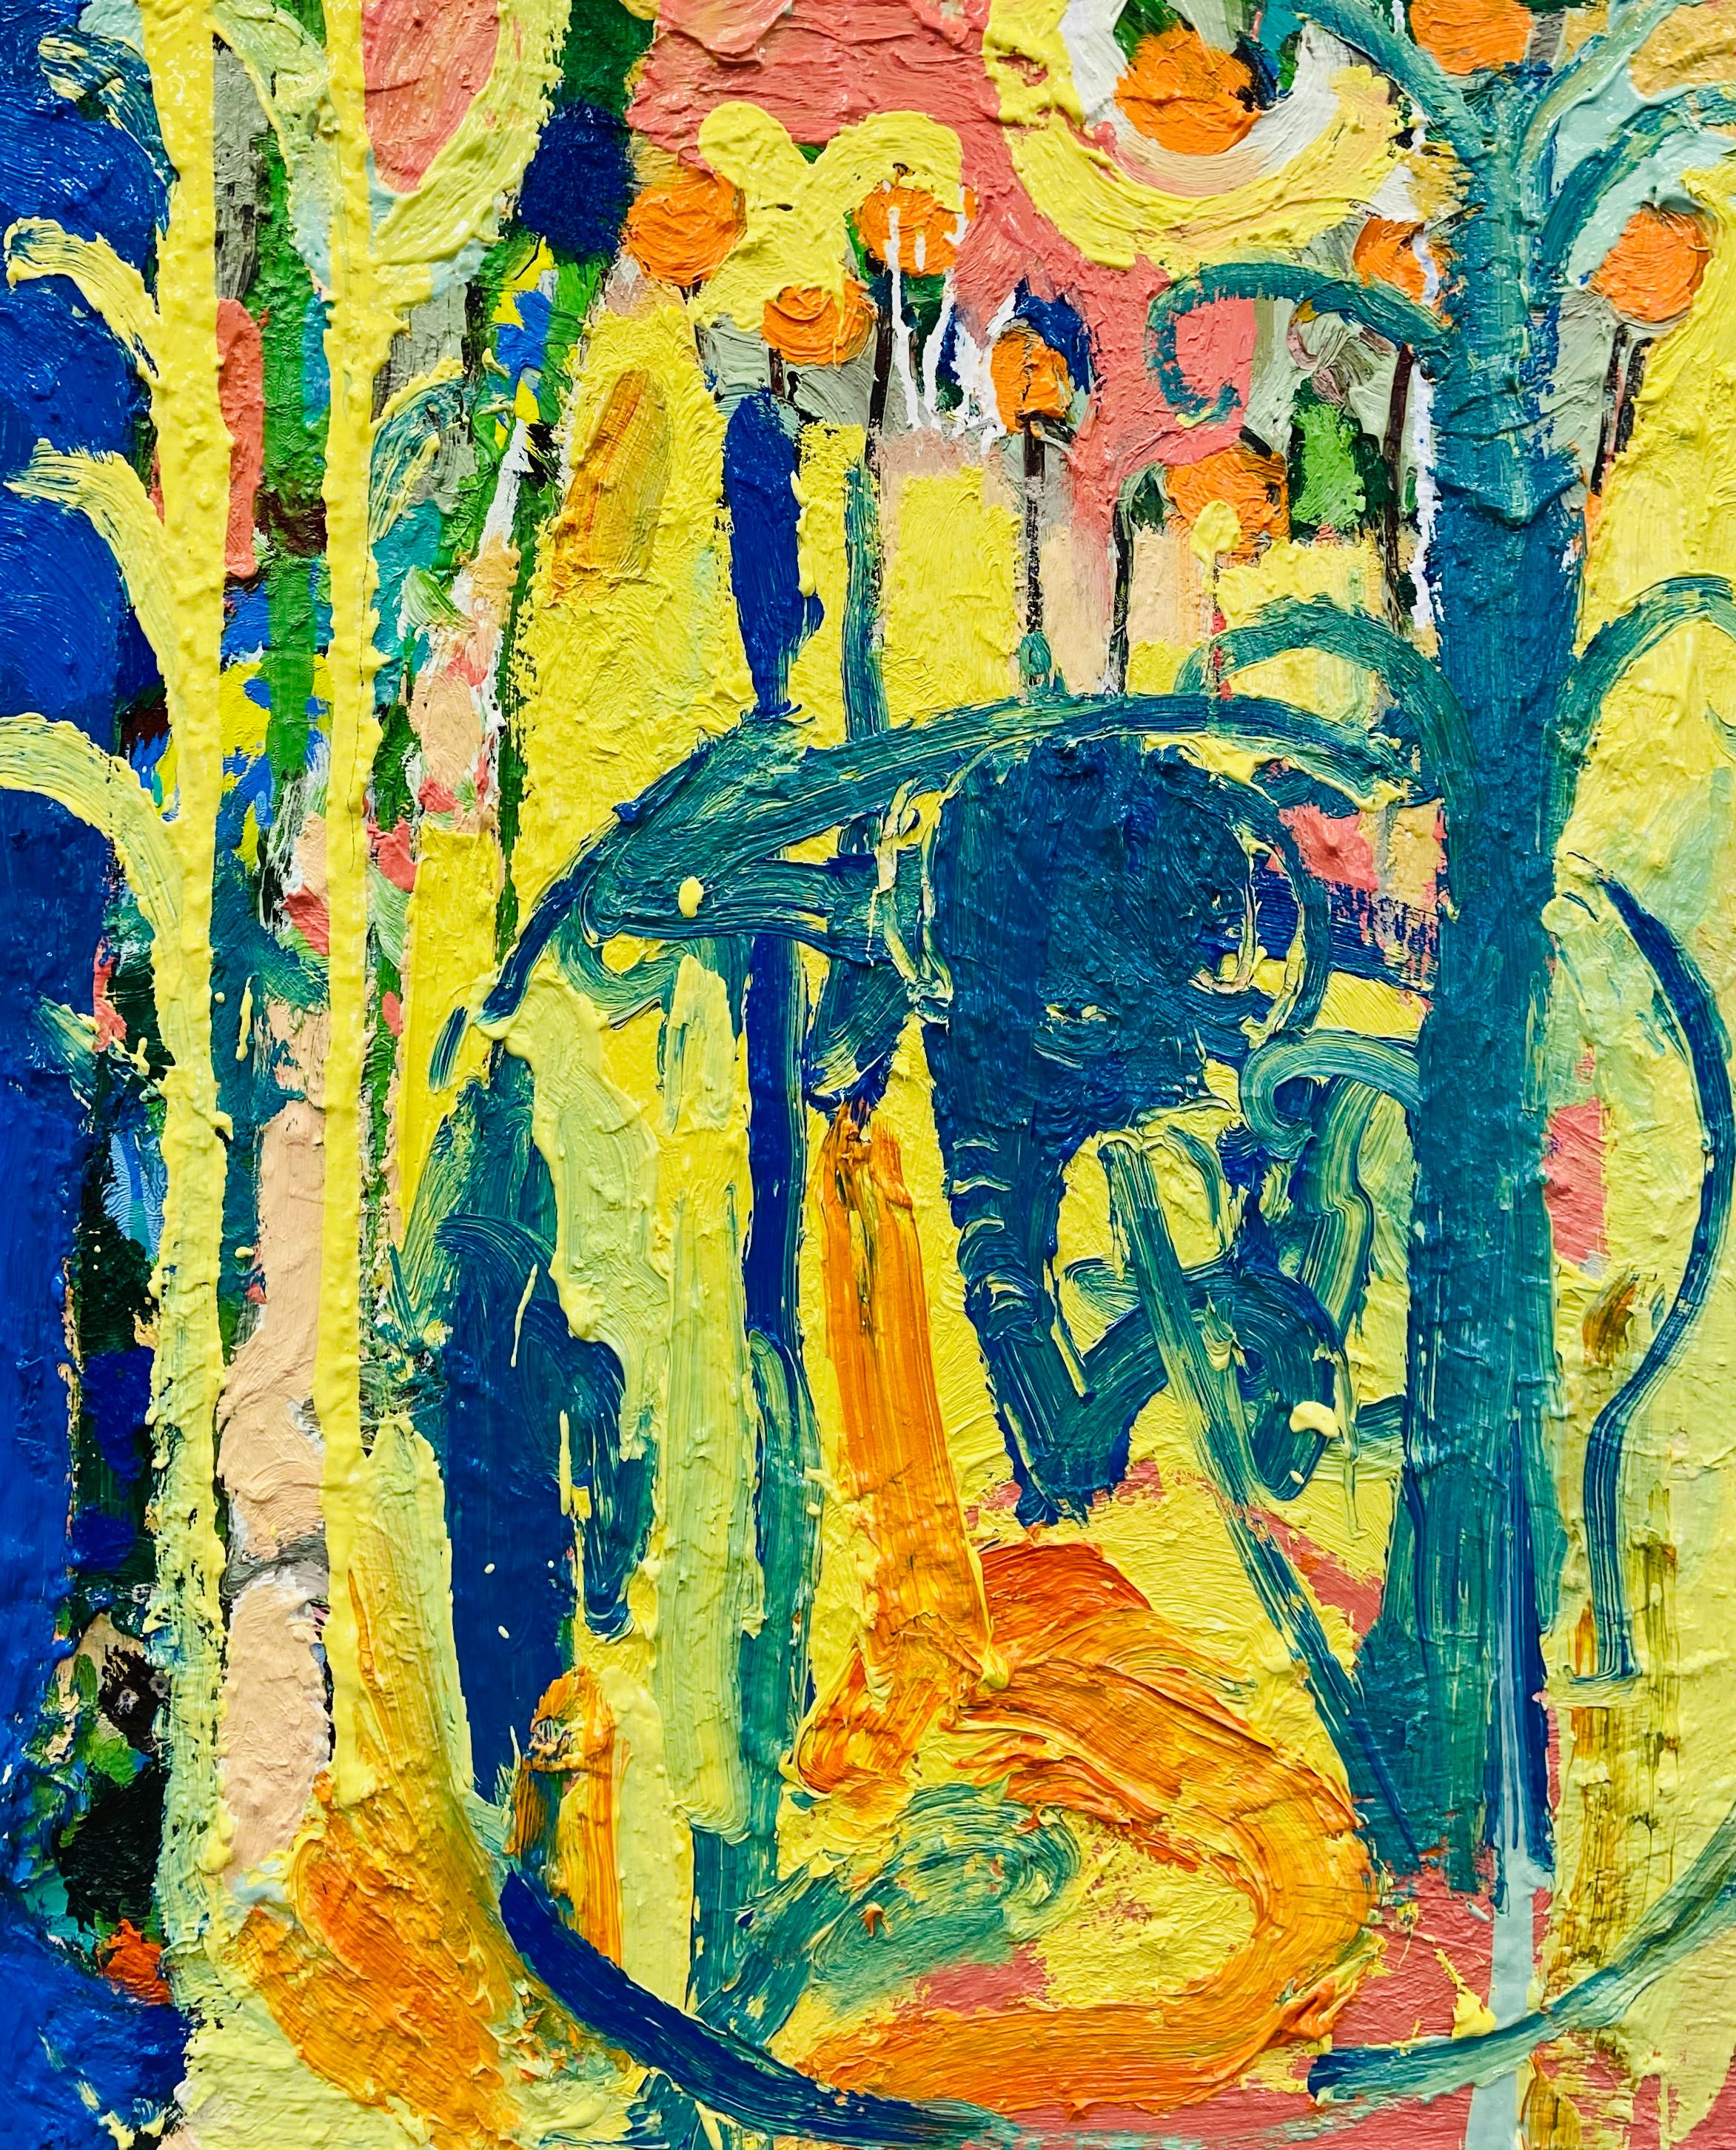 Paul wadsworth Landscape Painting - Talking To The Elephant.   Contemporary Abstract Expressionist Oil Painting